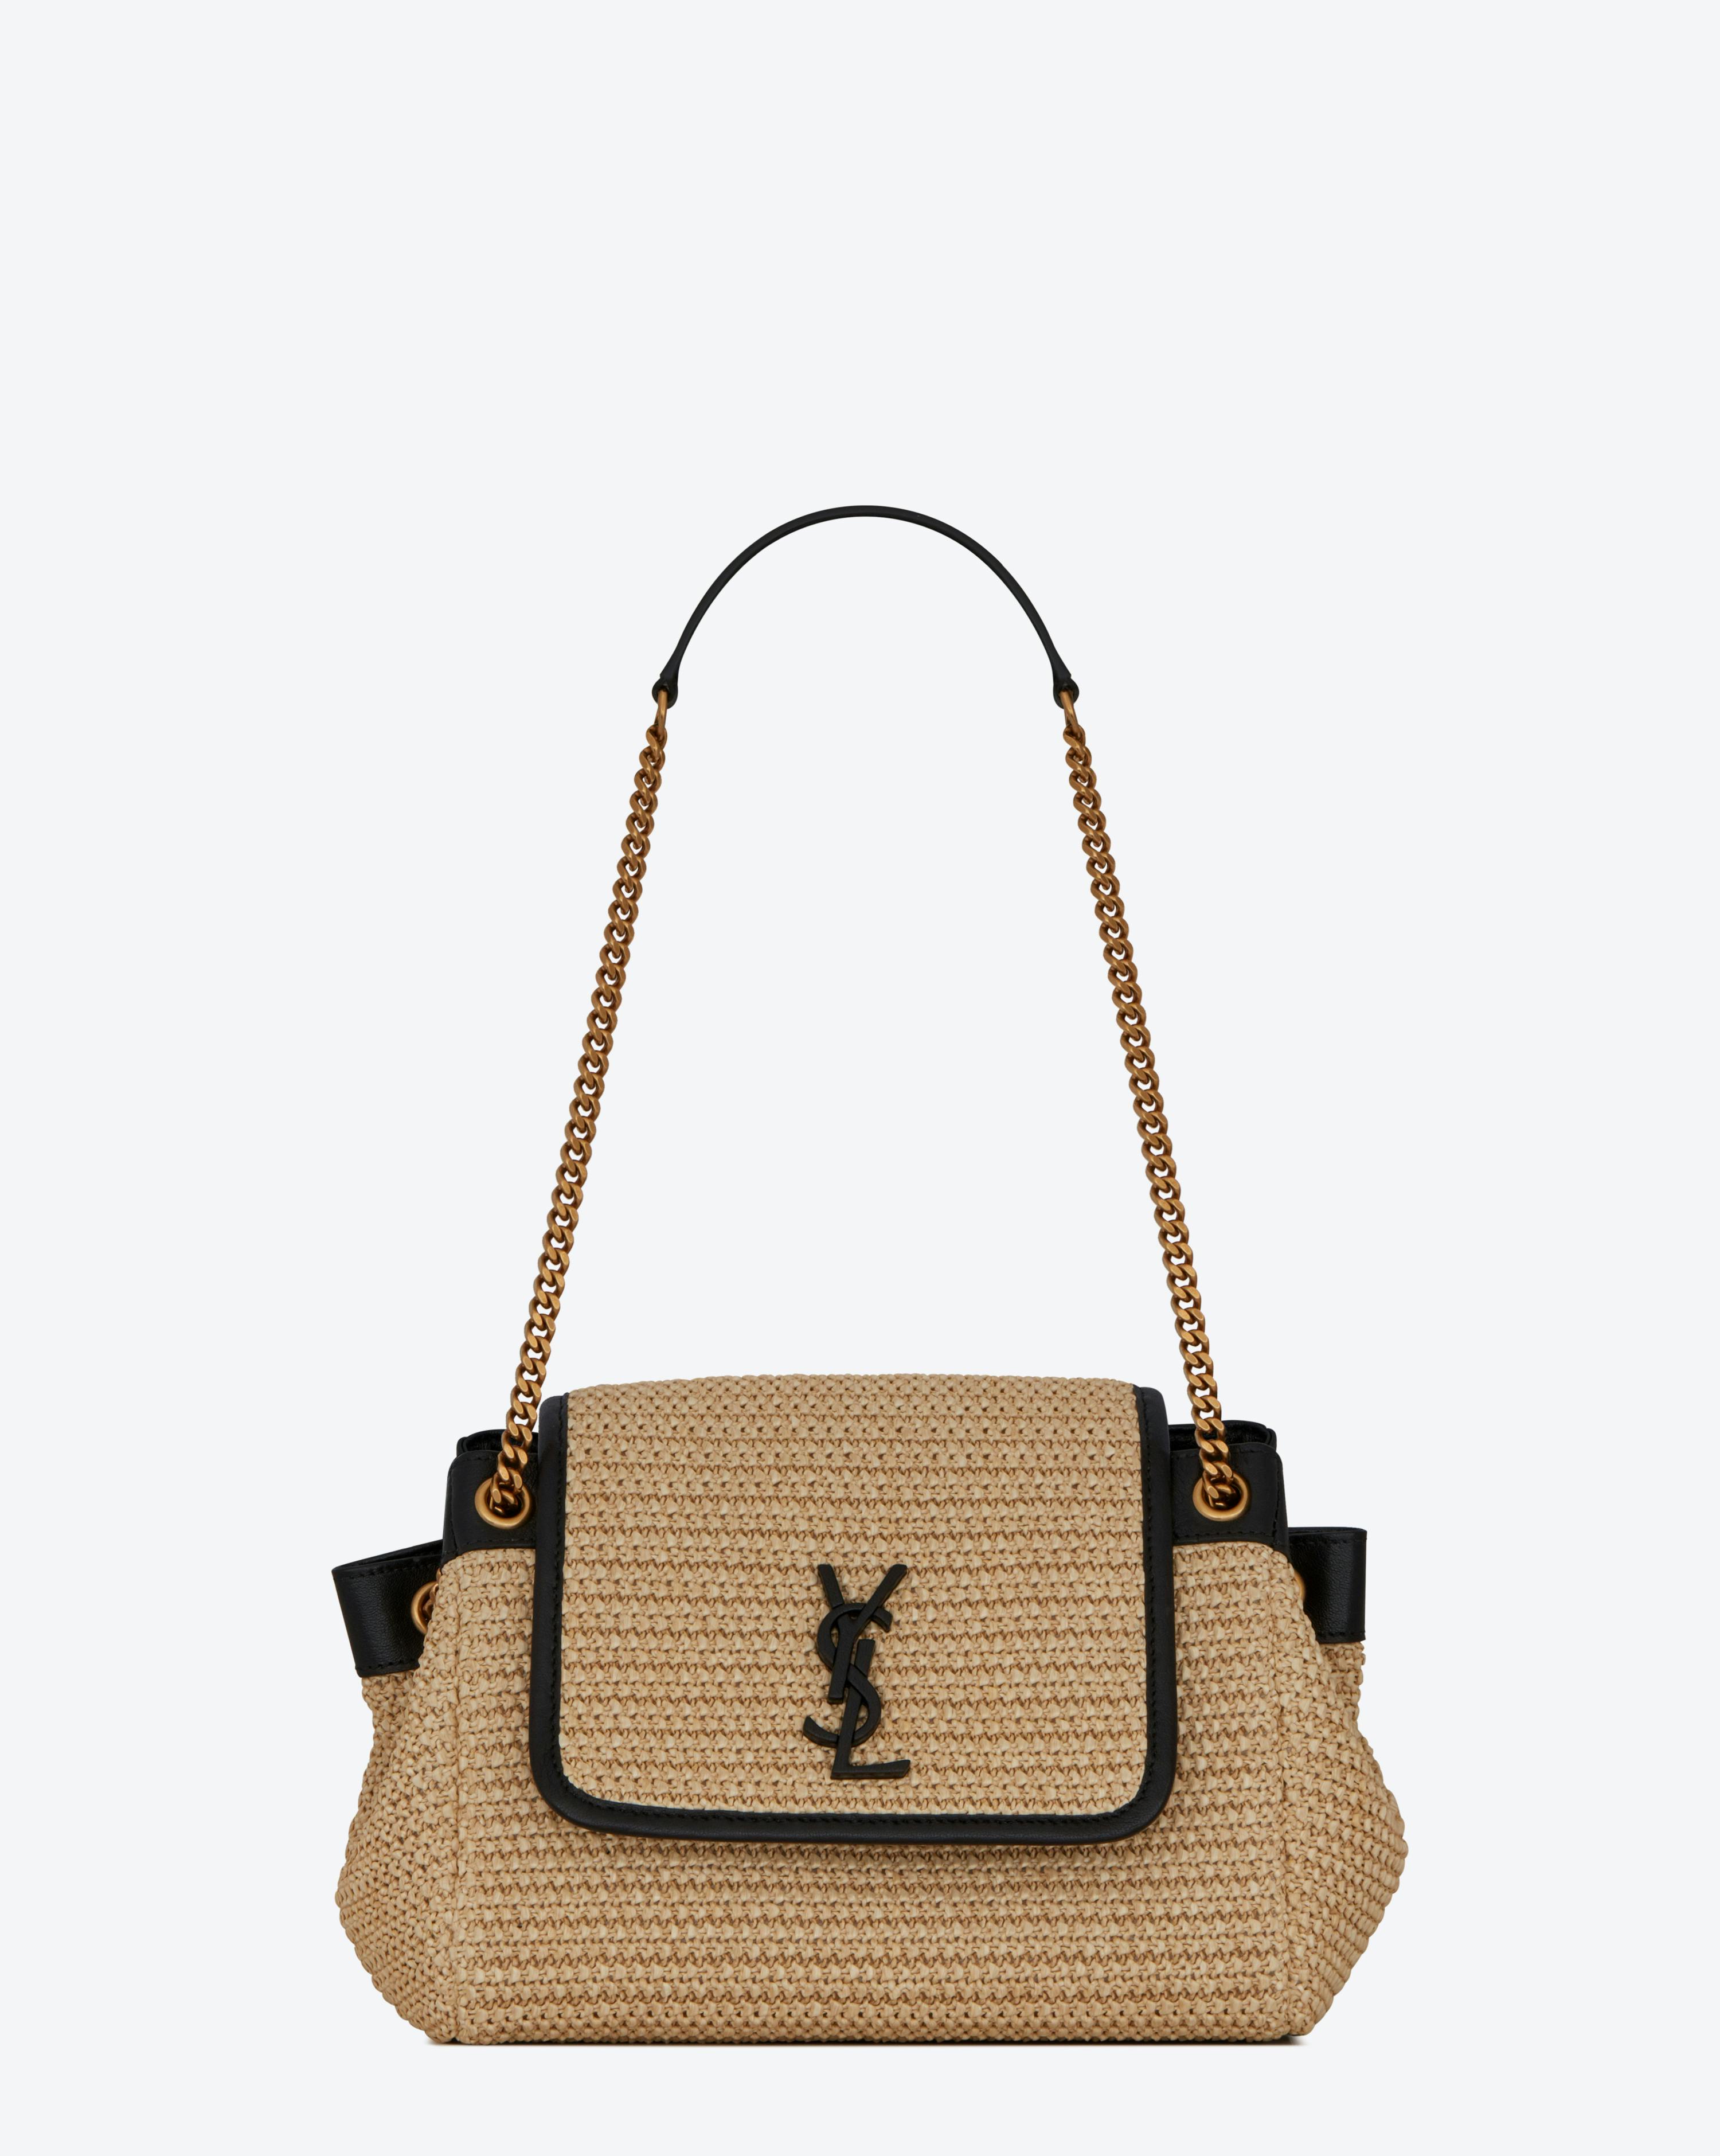 Saint Laurent Raffia Bags for Spring 2021 - Spotted Fashion